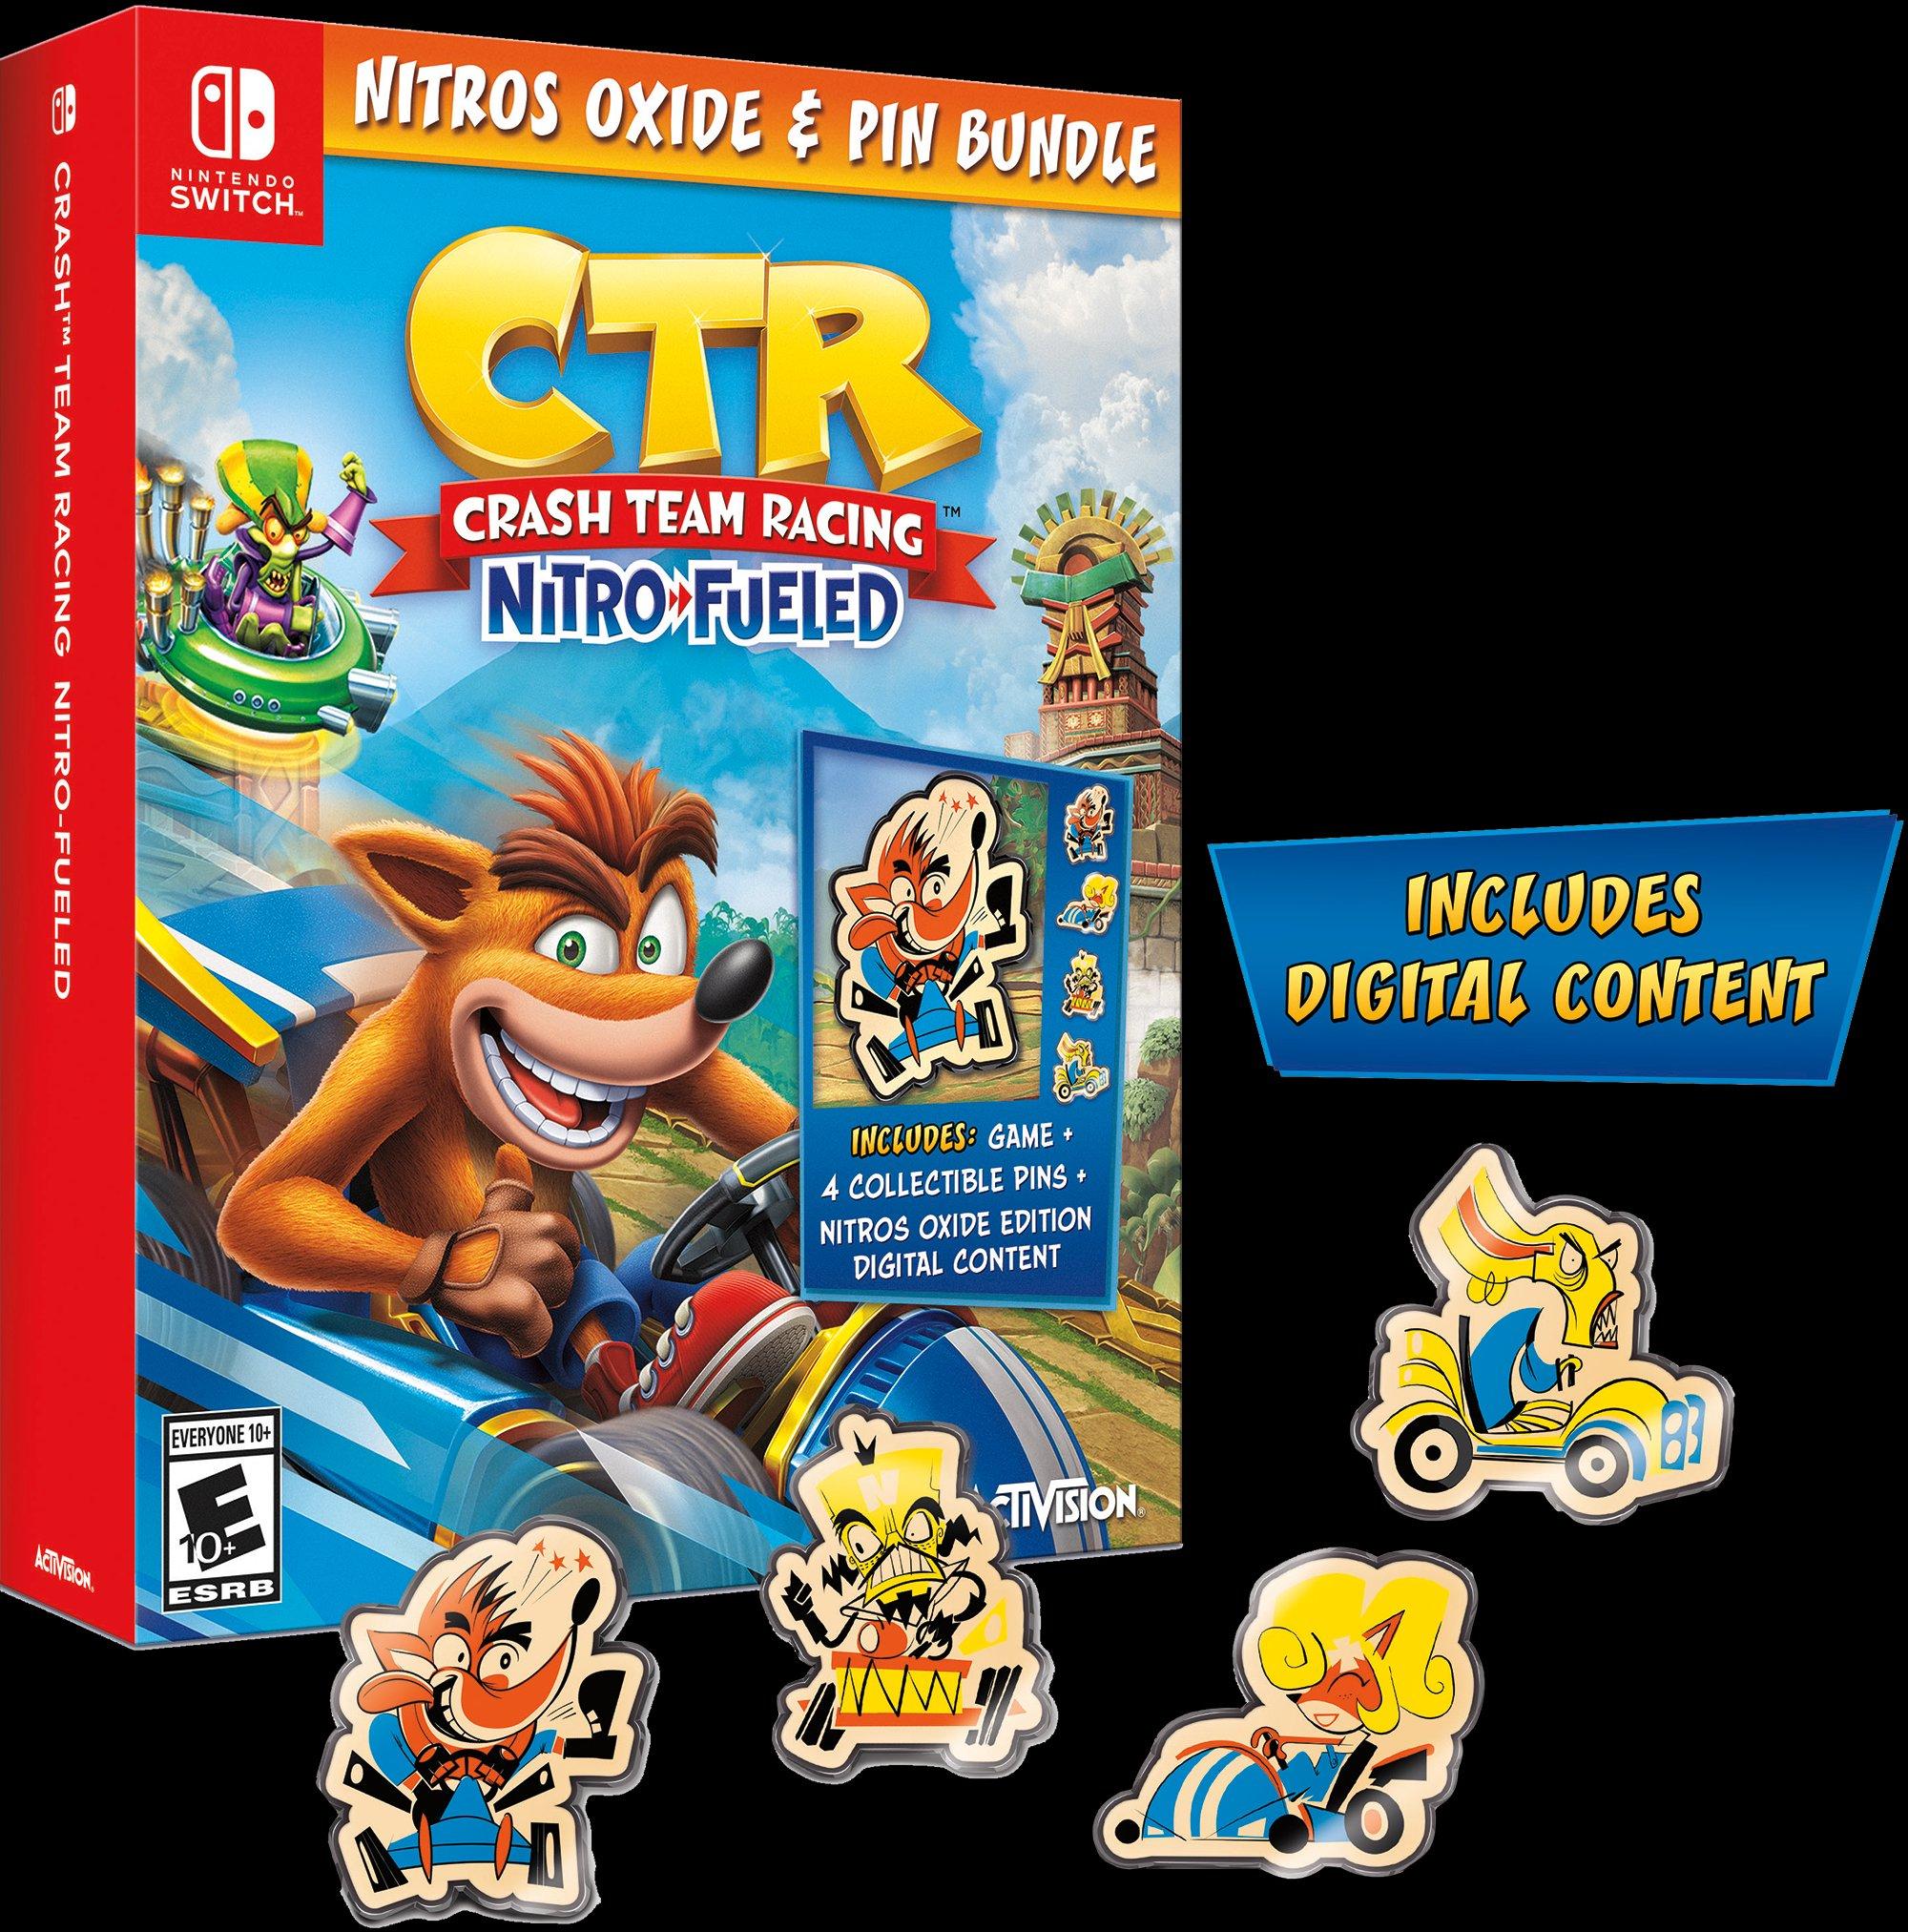 Crash team racing nitro fueled nitrous oxide edition worth it Crash Team Racing Nitro Fueled Nitros Oxide And Pin Bundle Only At Gamestop Nintendo Switch Gamestop